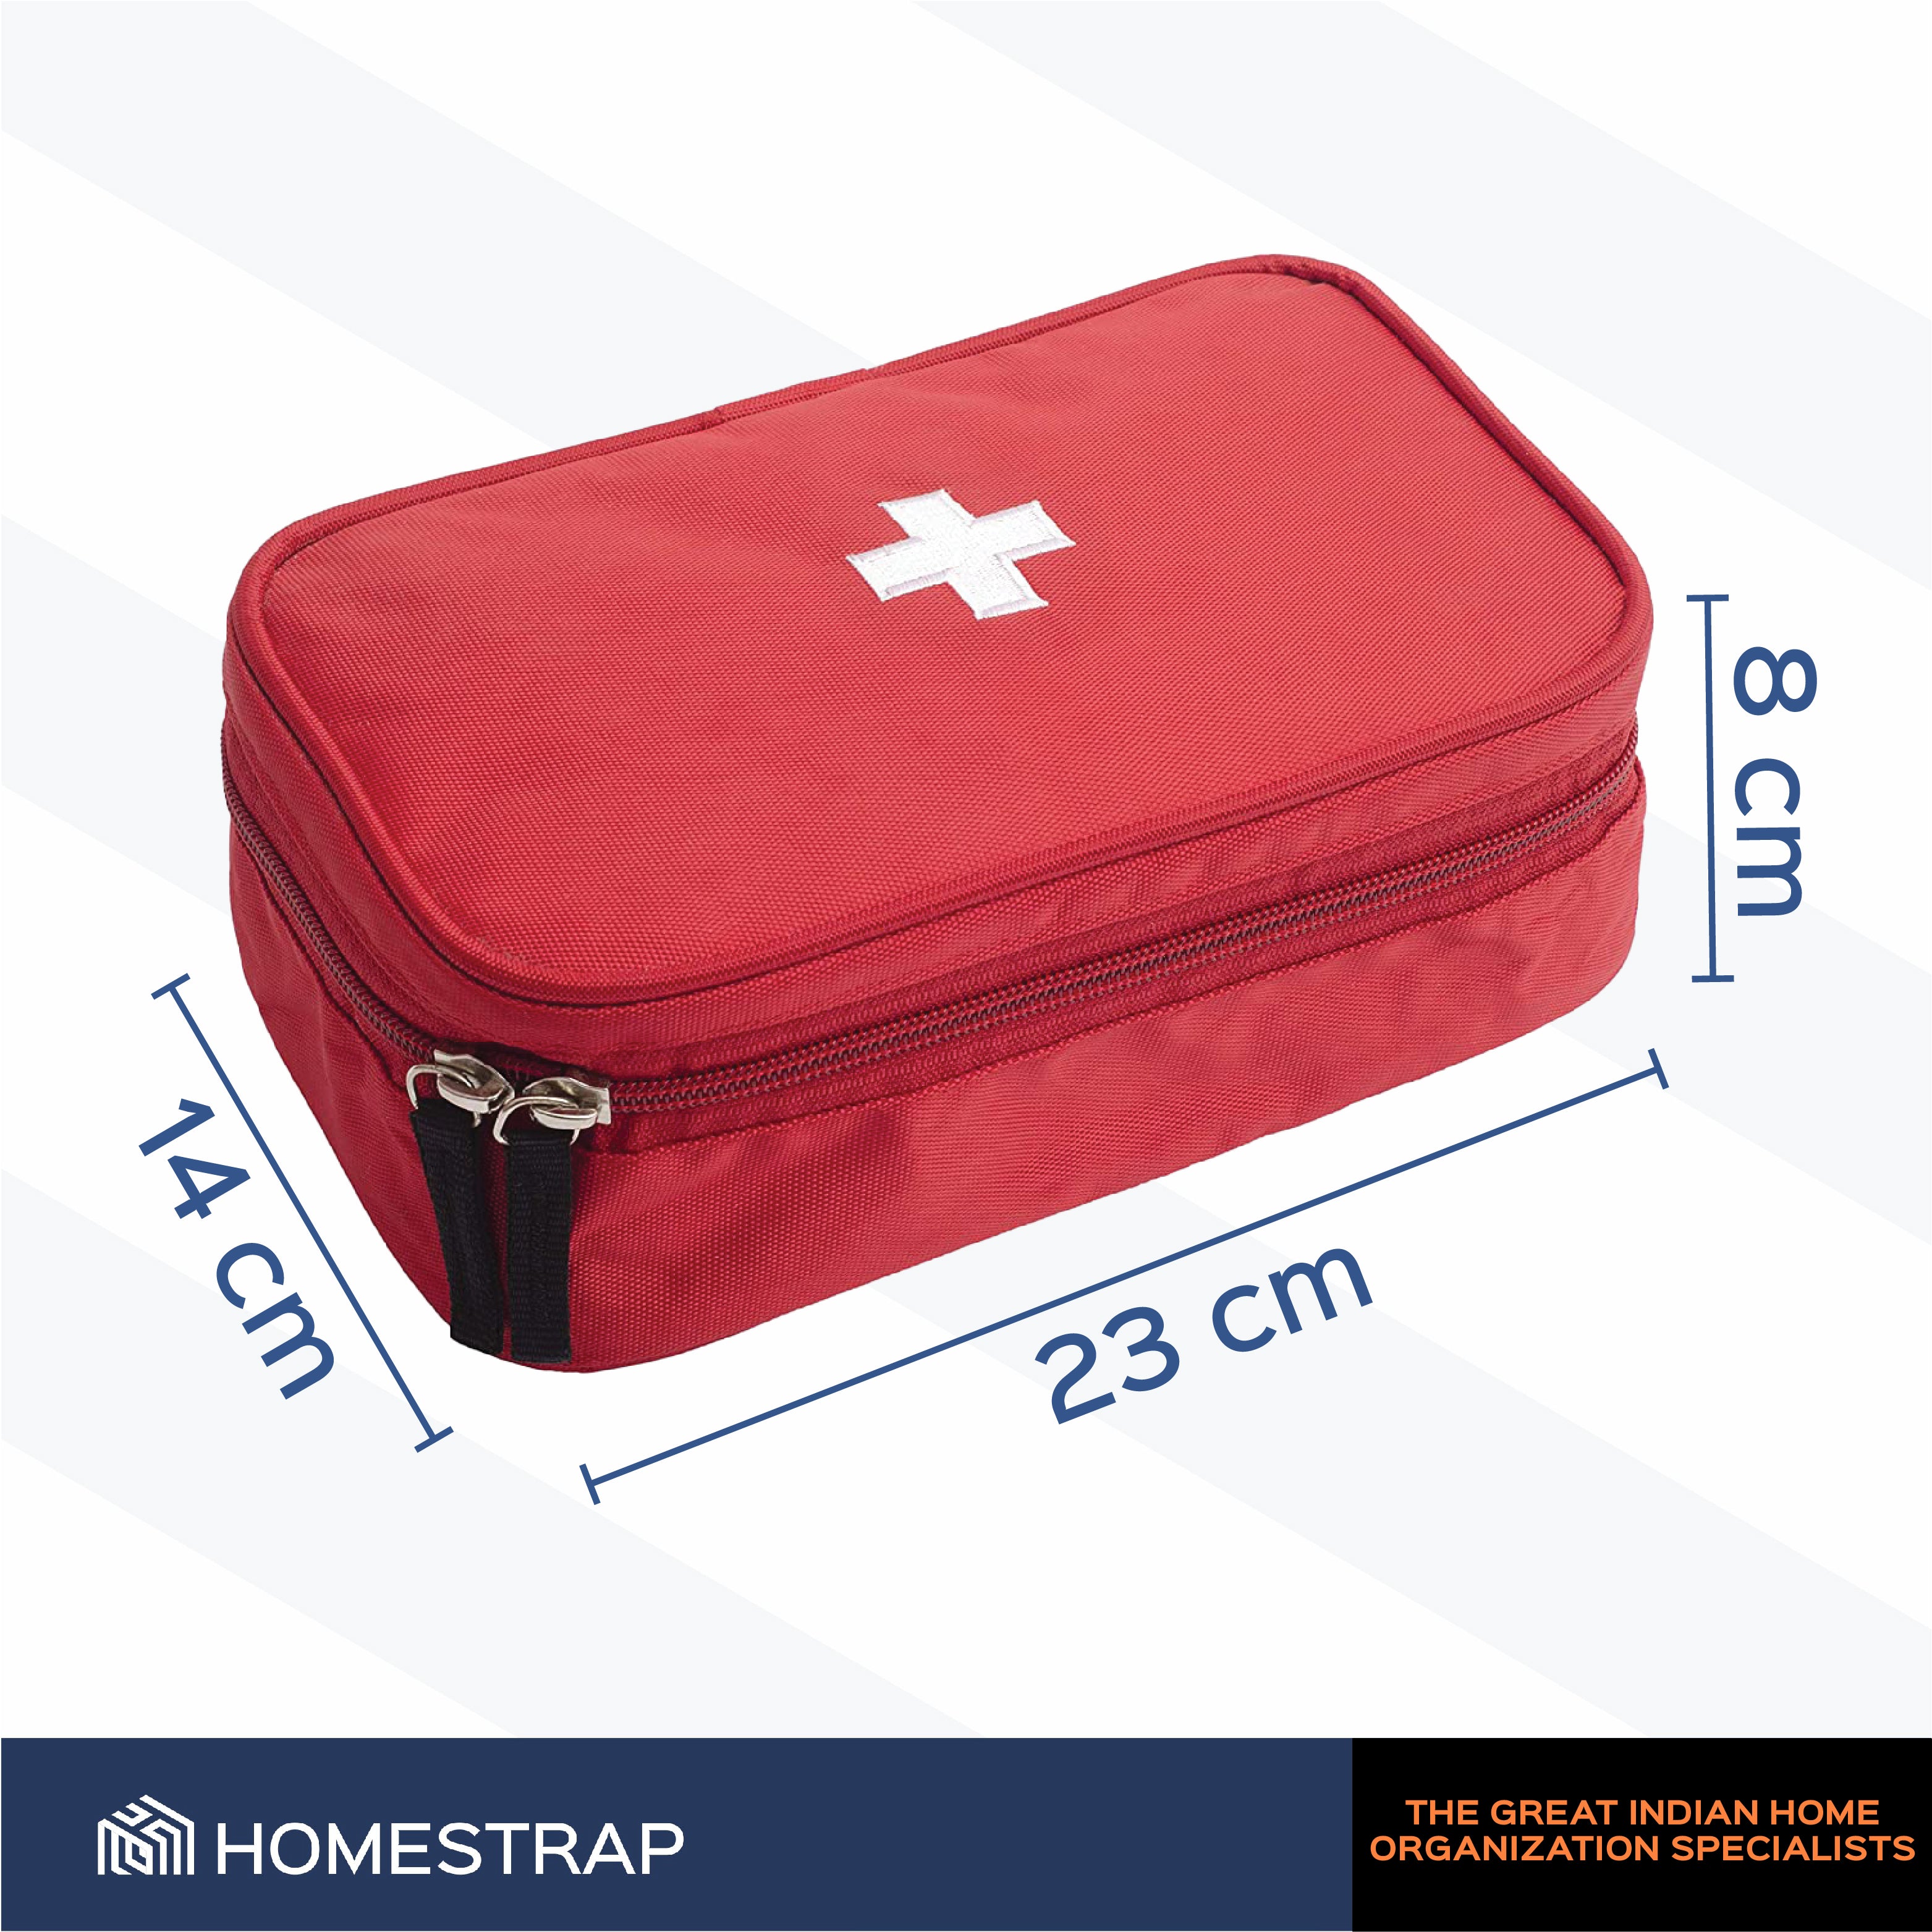 Waterproof First Aid Kit for Car Home Office, Compact Emergency